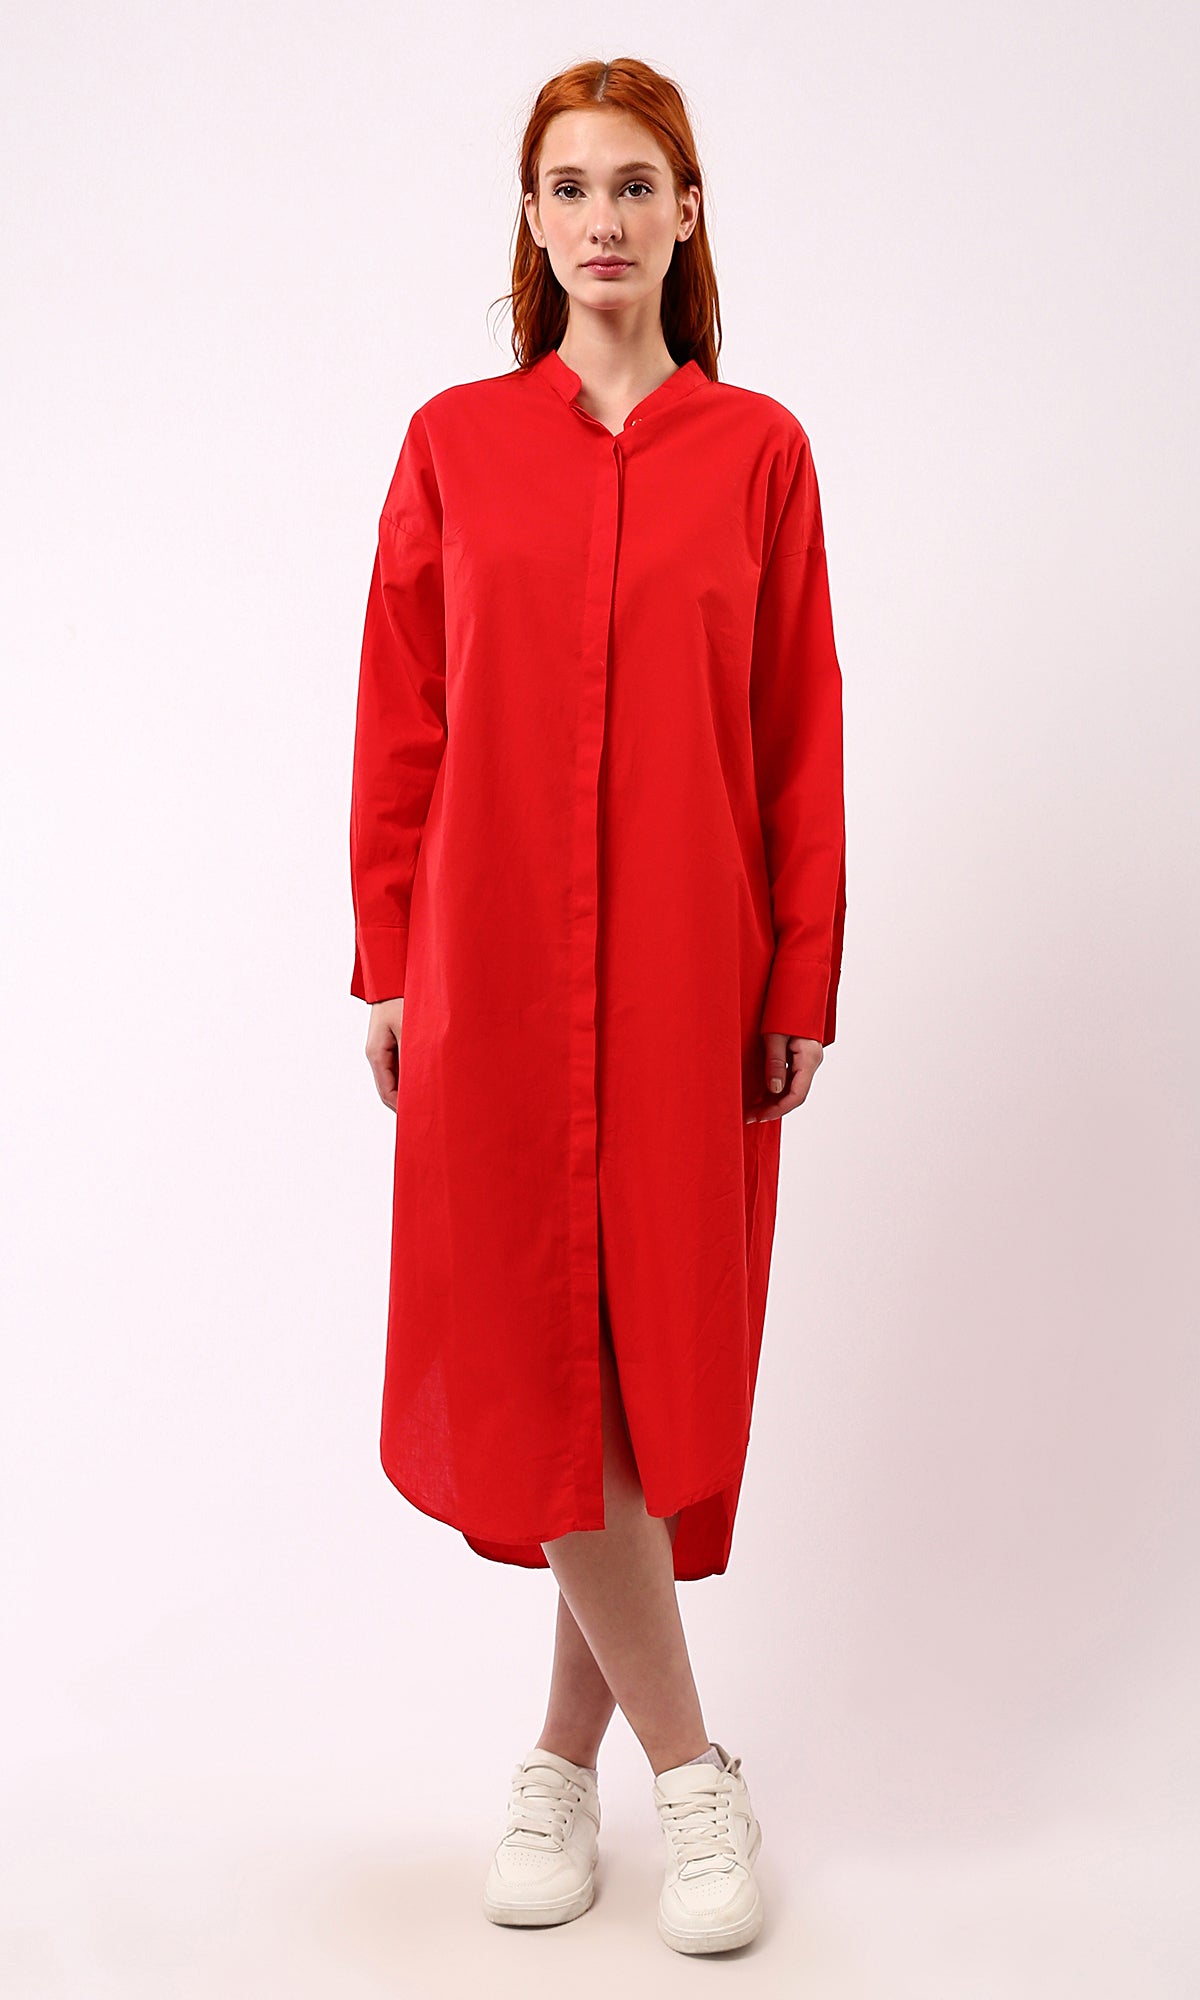 O179182 Long Sleeves Red Shirt Dress With Front Hidden Buttons